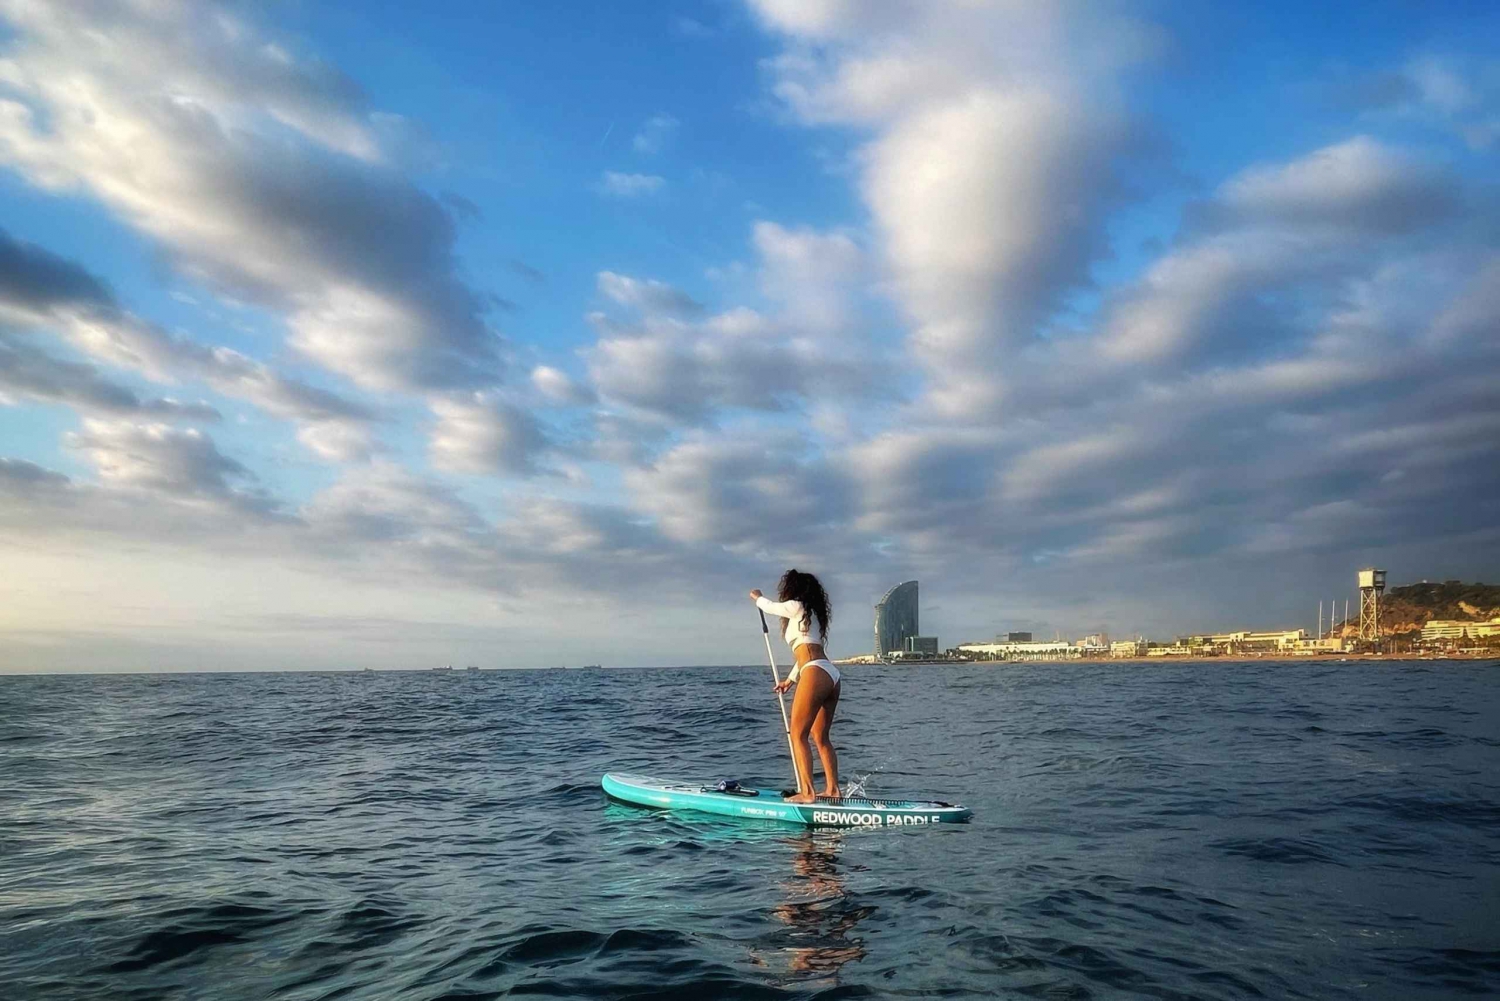 Sunset+paddle surf with music+fotos&videos Barceloneta+snack